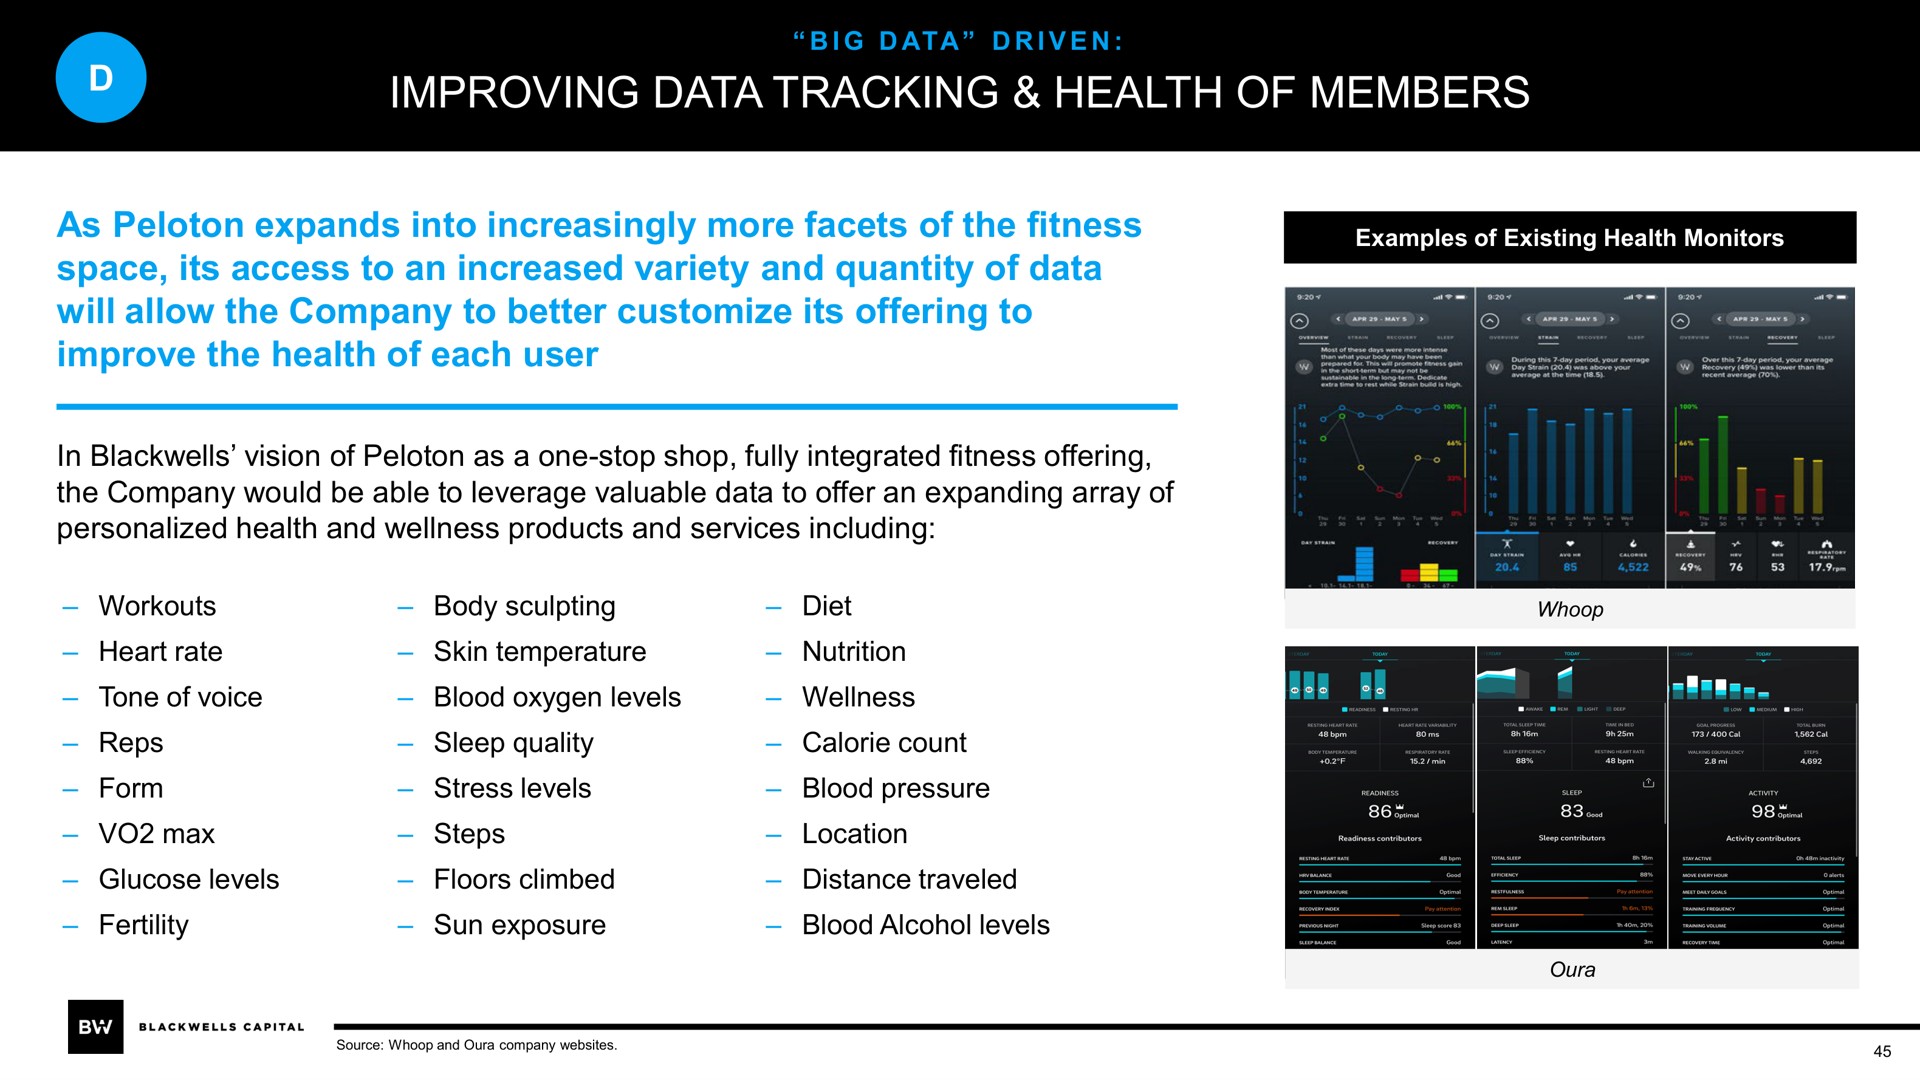 improving data tracking health of members as peloton expands into increasingly more facets of the fitness space its access to an increased variety and quantity of data will allow the company to better its offering to improve the health of each user | Blackwells Capital